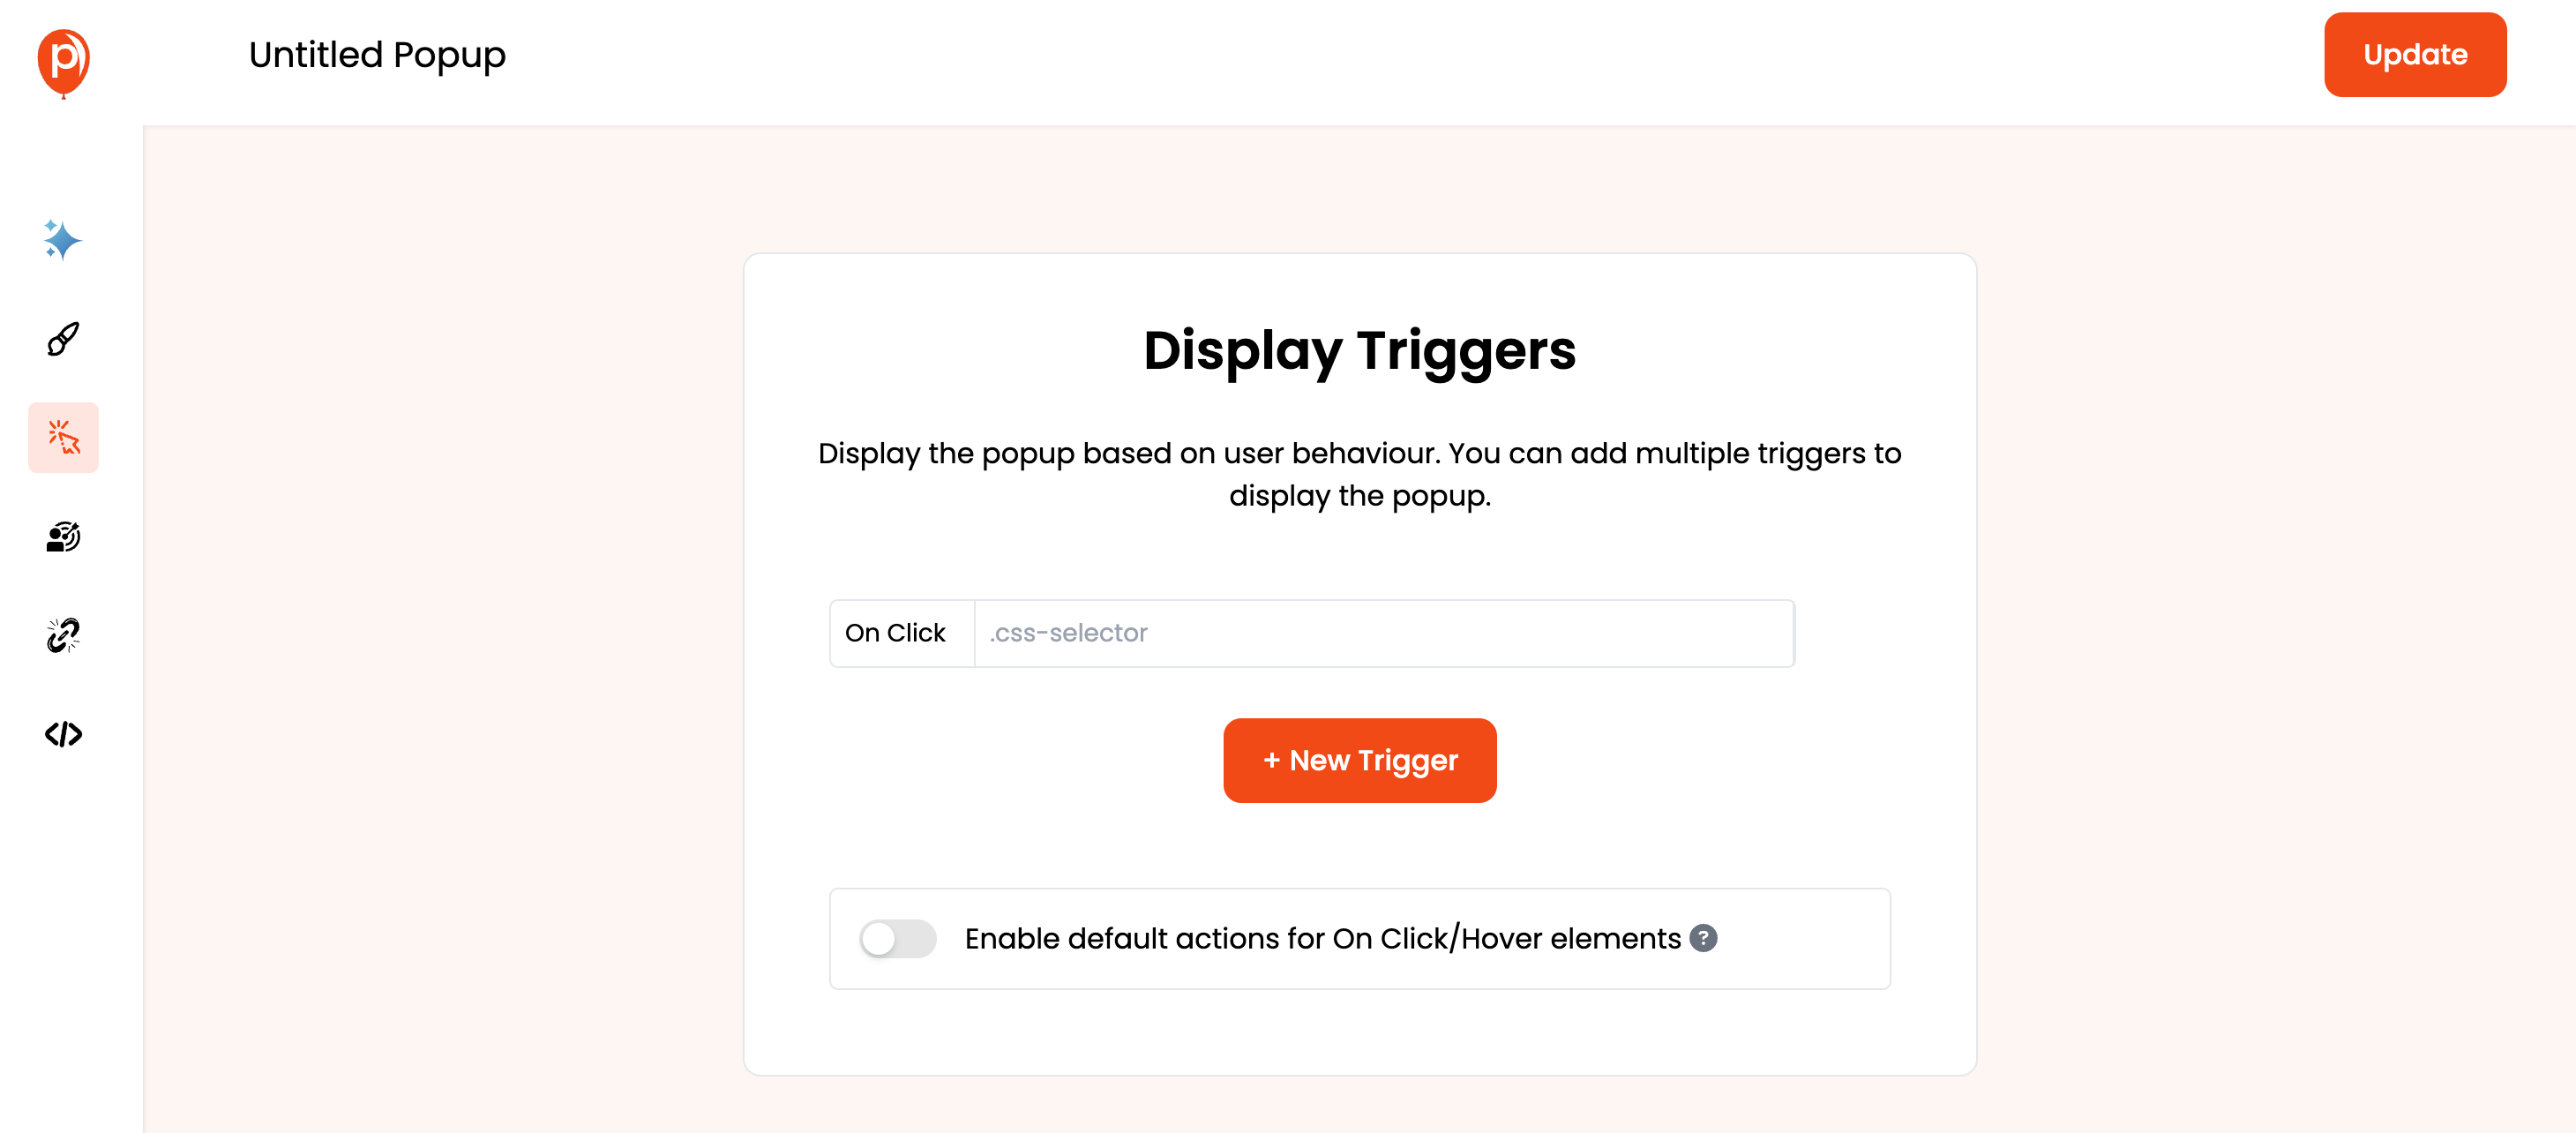 Setting Up the Trigger for on-click button